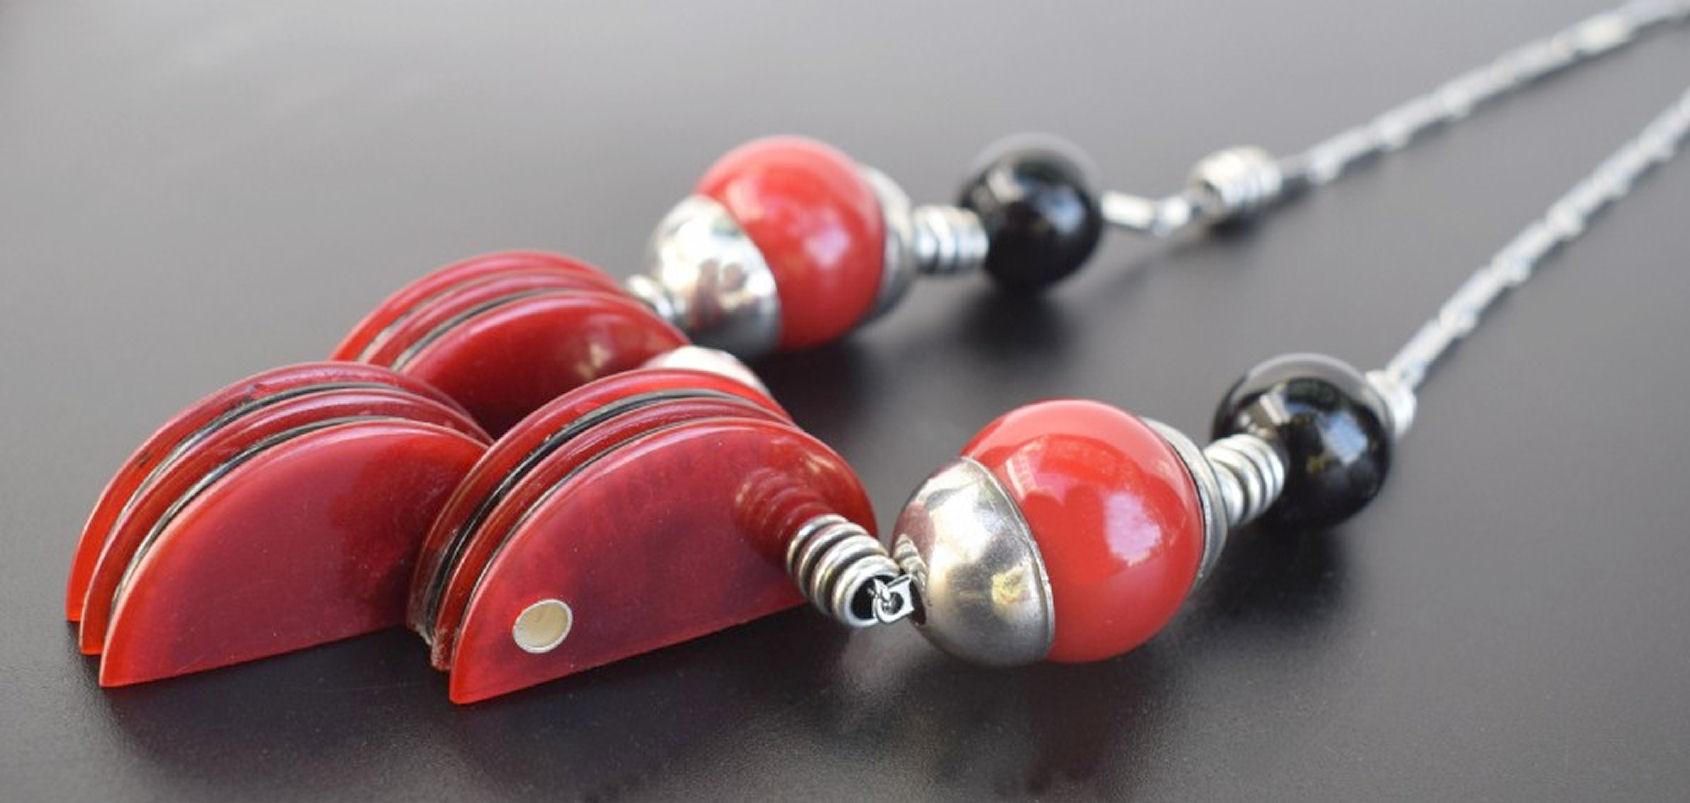 Fabulous Modernist statement necklace with the most desirable and exquisite detailing and craftsmanship, if you love Art Deco then this should be making your heart skip a beat. Features cherry red and black Galalith ( French version of bakelite)